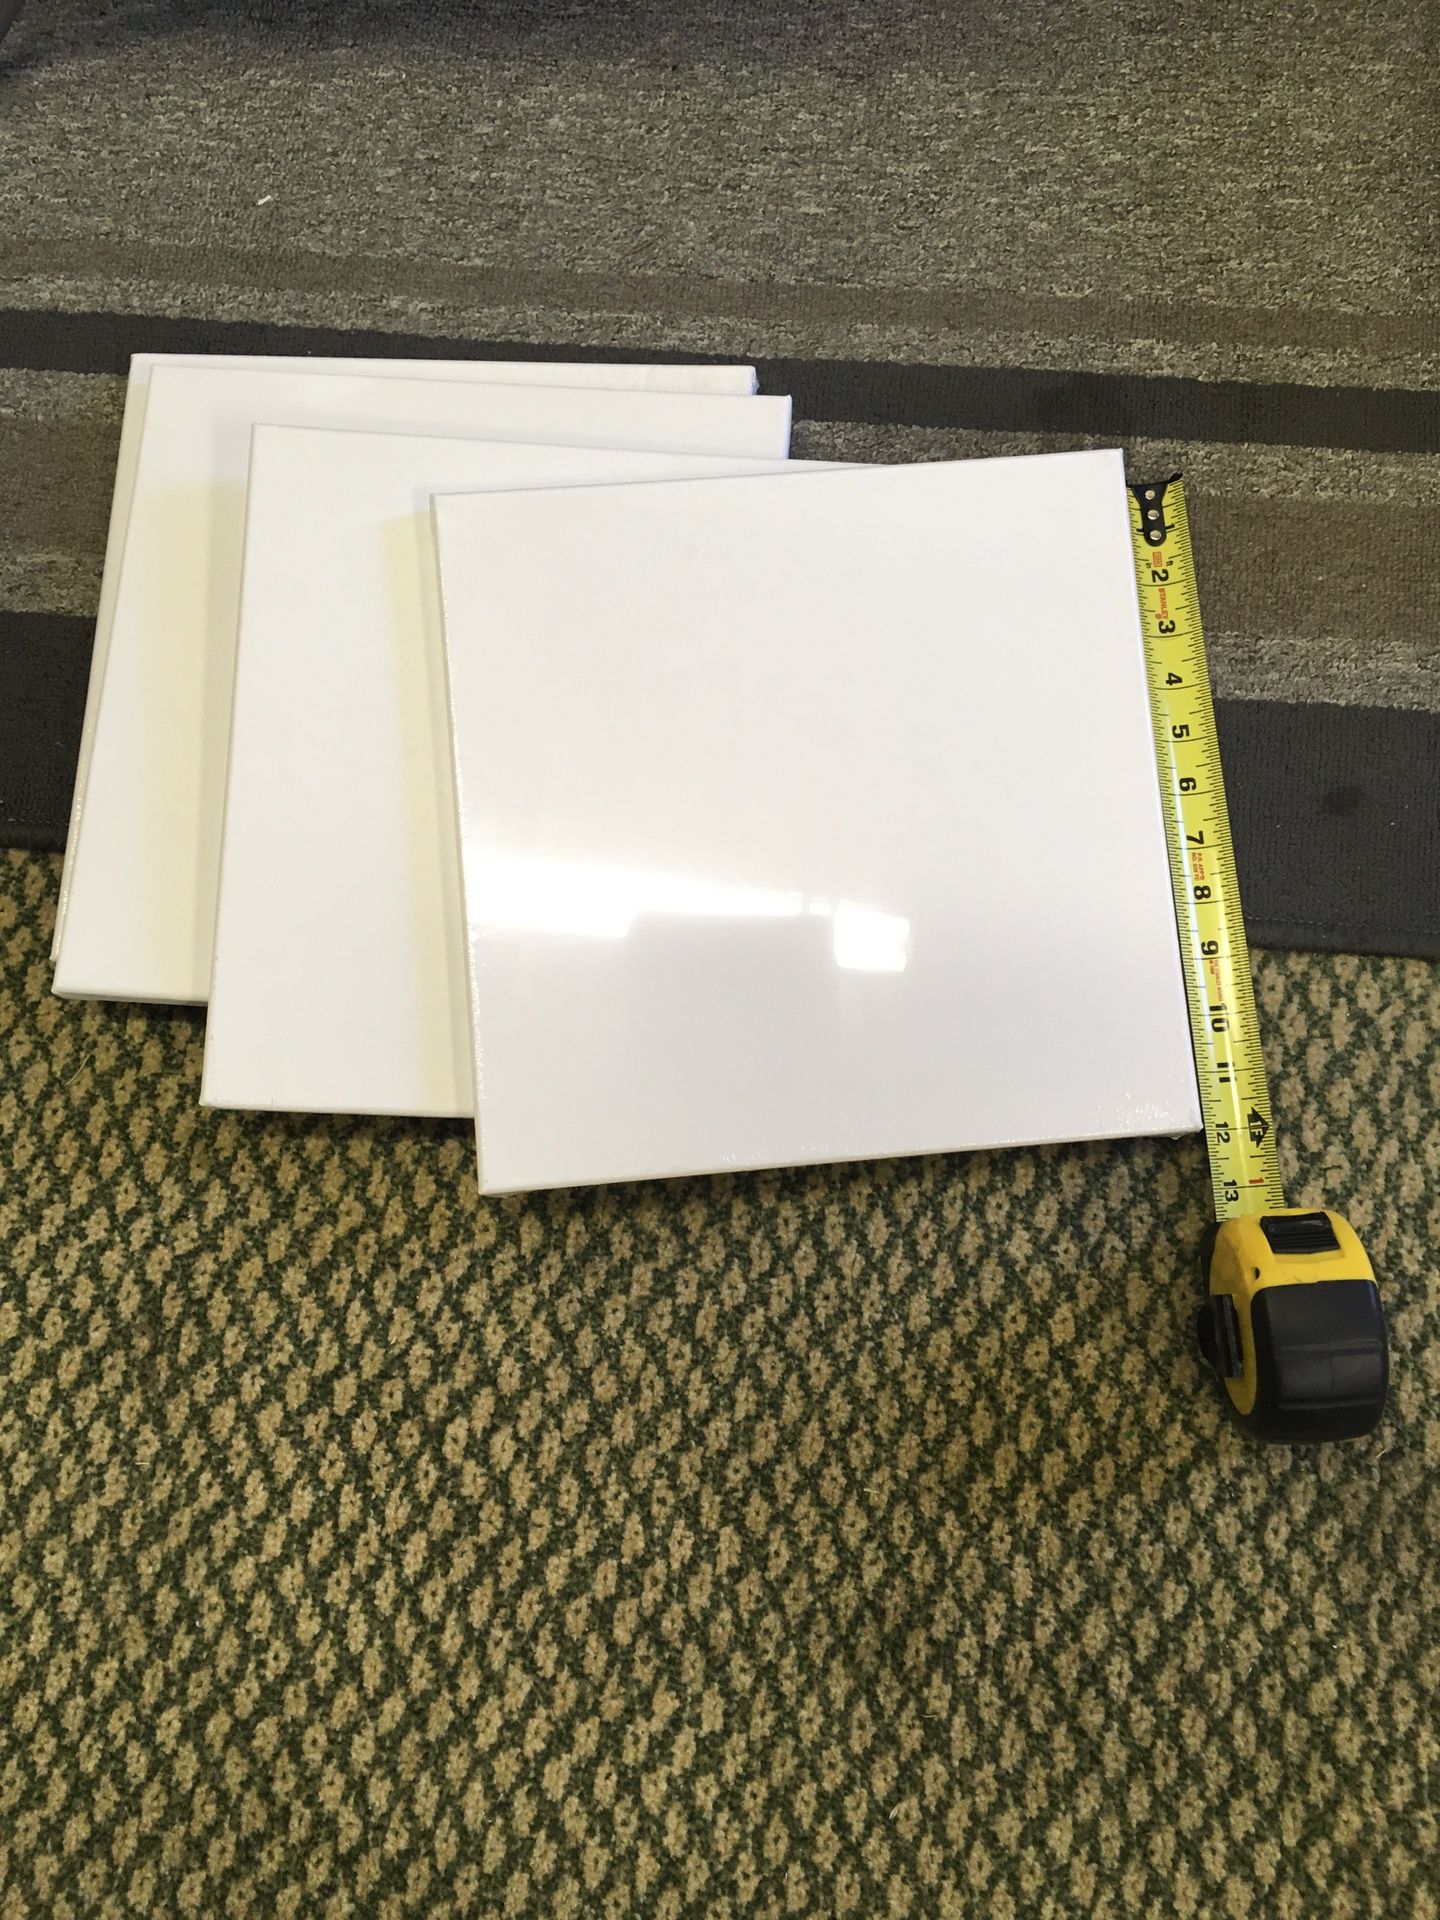 12” by 12” painters canvases